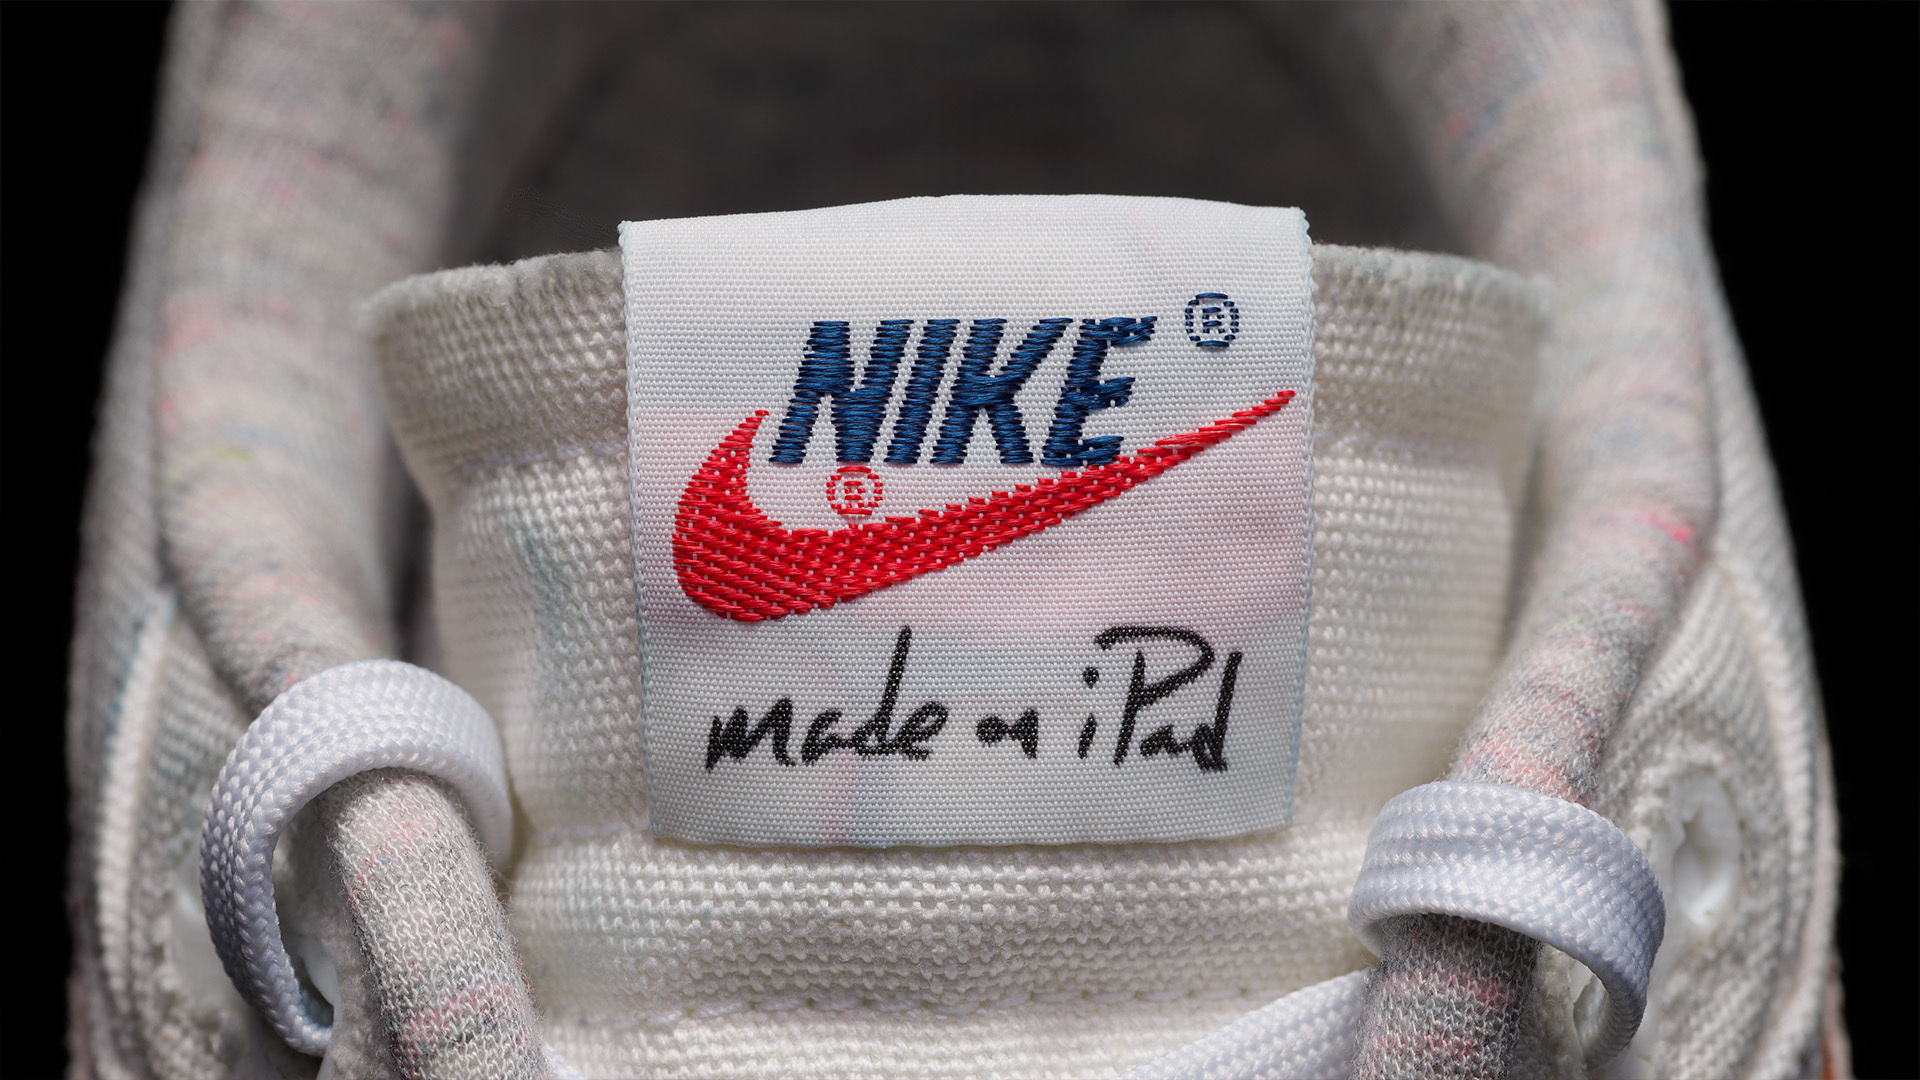 Close-up of a Nike sneaker tongue with the logo and &quot;made on iPad&quot; text